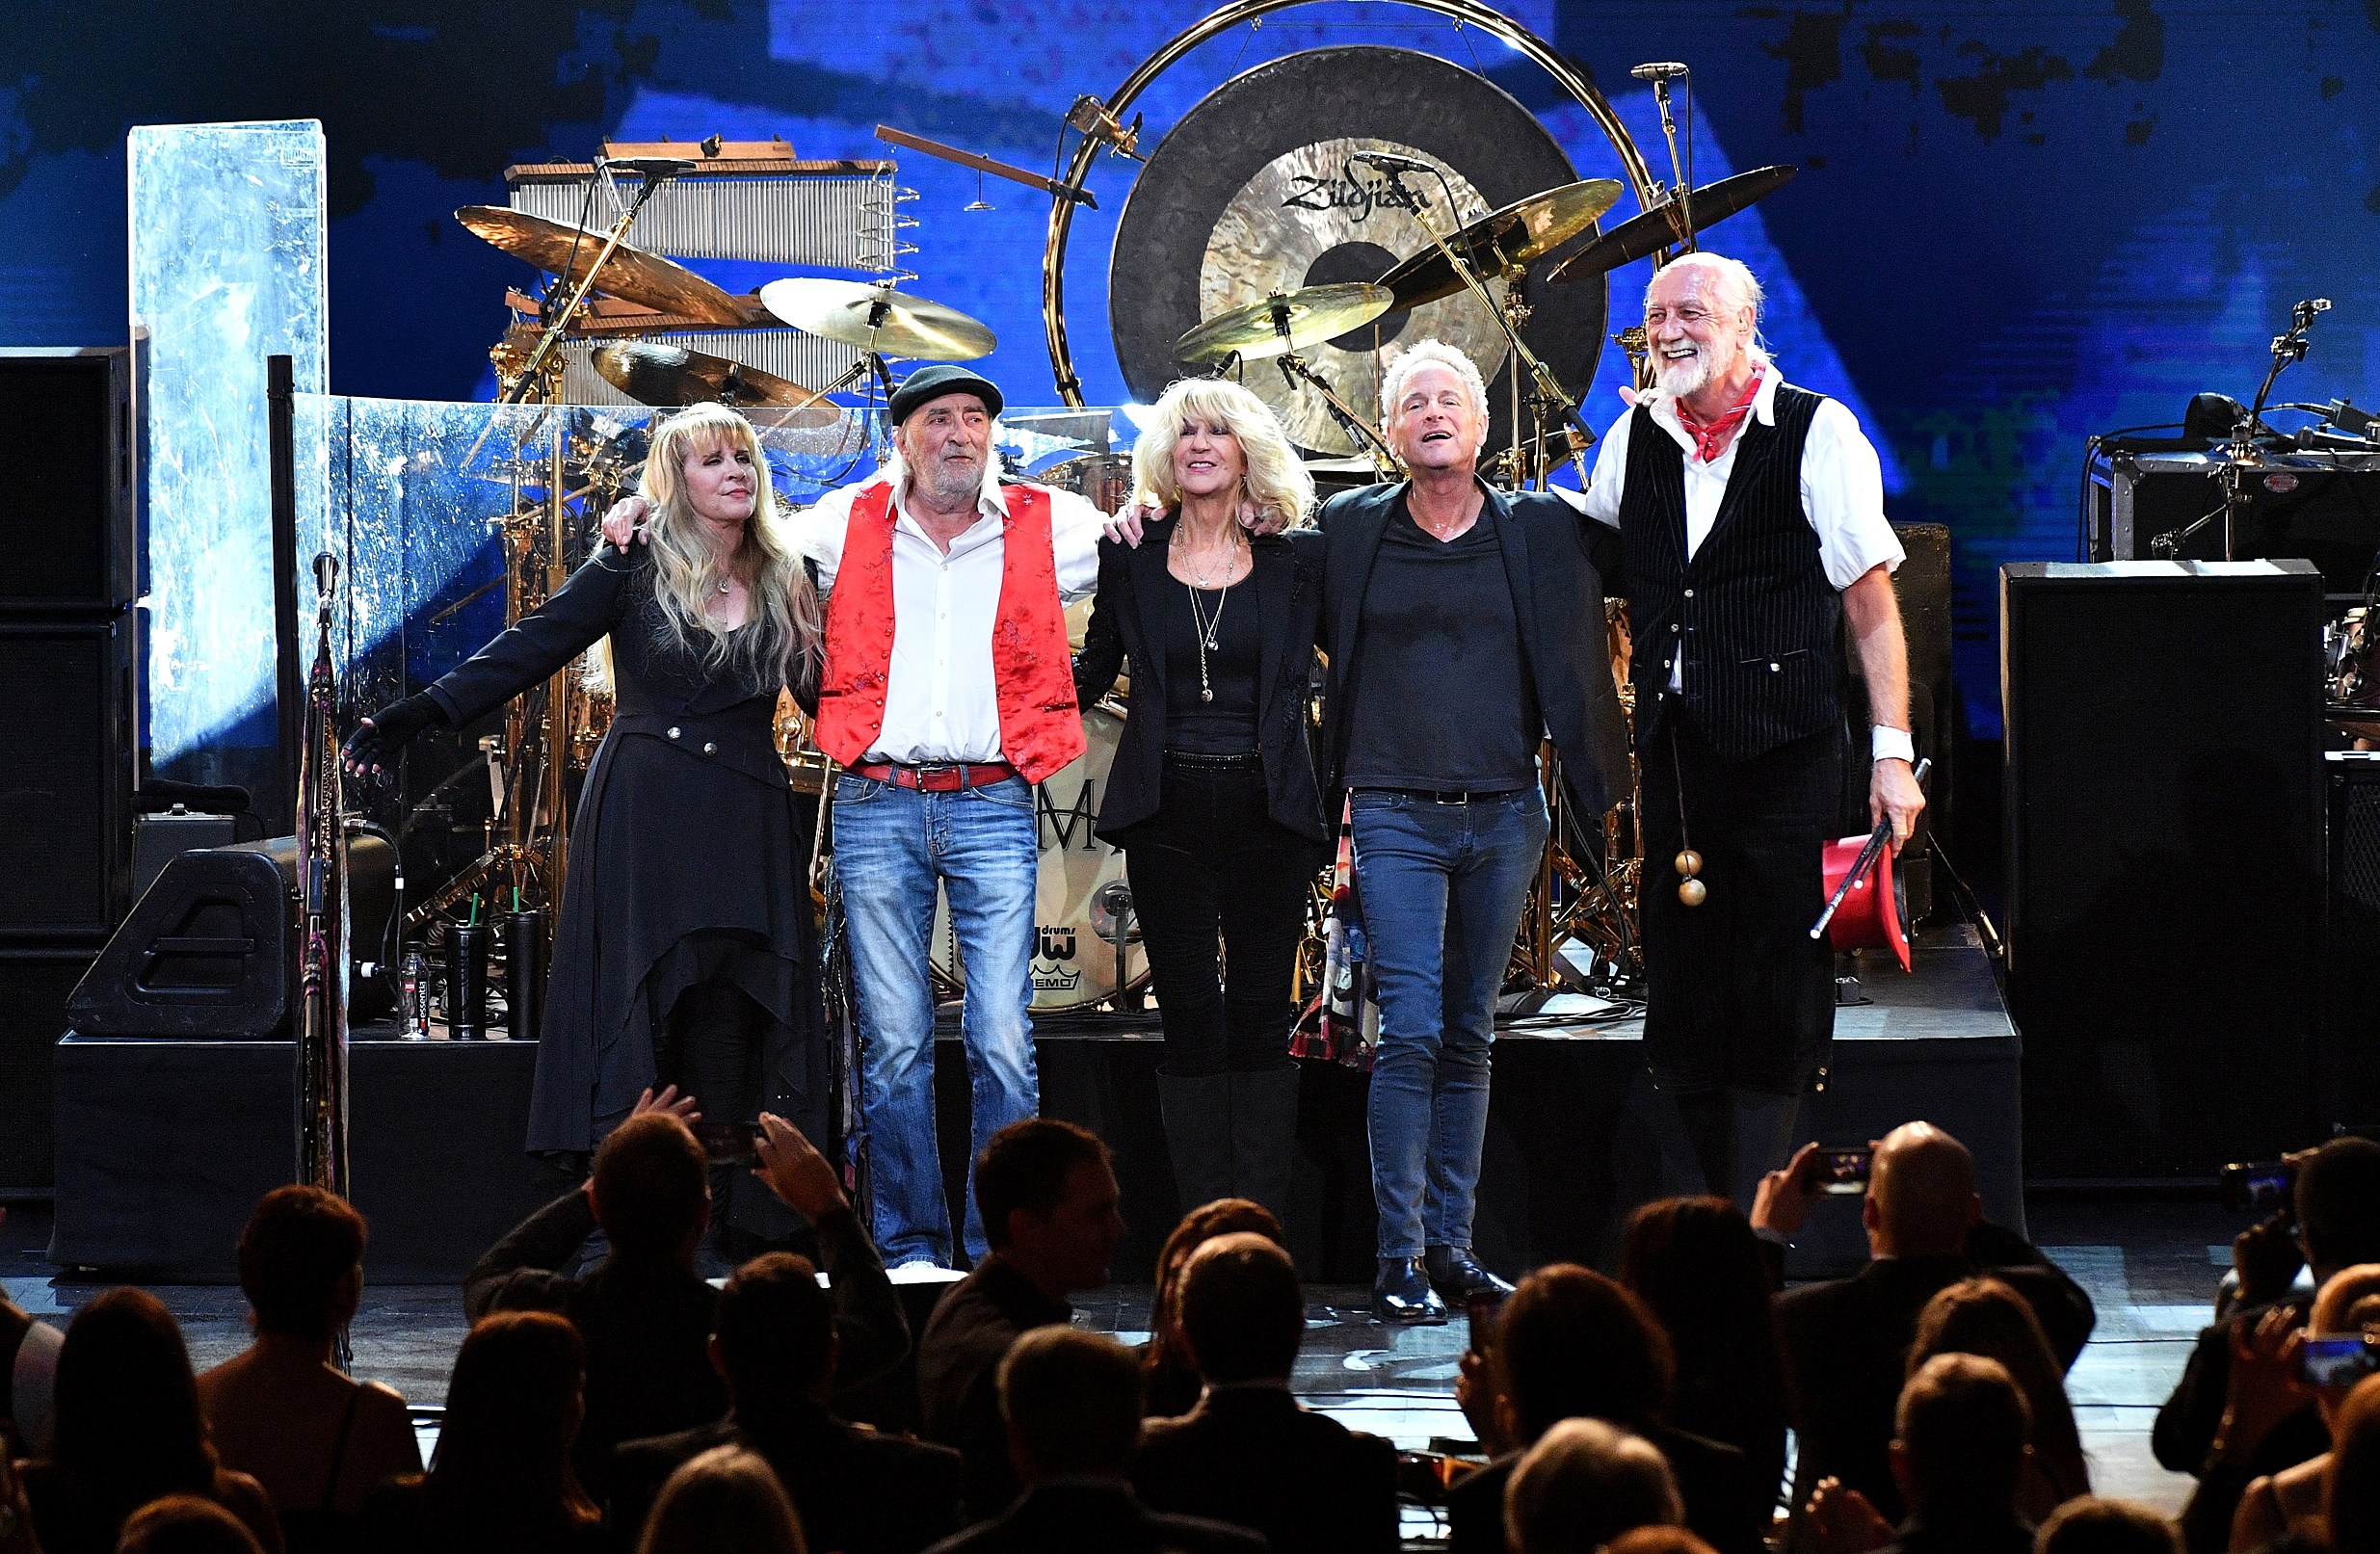 End of an era. Honorees Stevie Nicks, John McVie, Christine McVie, Lindsey Buckingham and Mick Fleetwood of Fleetwood Mac seen onstage during MusiCares Person of the Year honoring Fleetwood Mac at Radio City Music Hall on January 26, 2018 in New York City. (Photo by Dia Dipasupil/Getty Images)